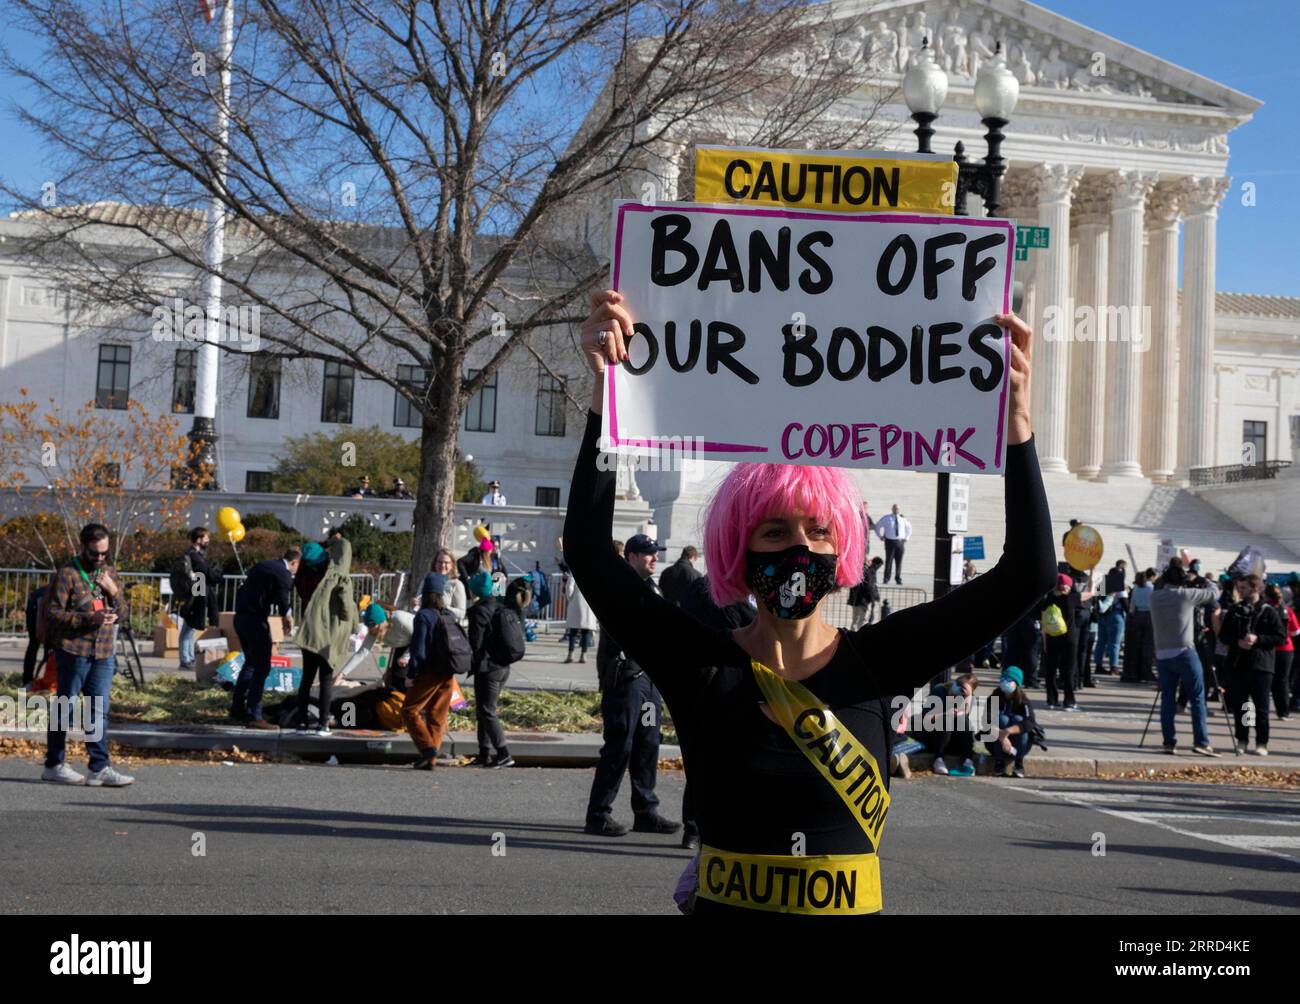 211202 -- WASHINGTON, D.C., Dec. 2, 2021 -- A pro-abortion protester rallies in front of the Supreme Court in Washington, D.C., the United States, Dec. 1, 2021. The conservative majority in the U.S. Supreme Court signaled Wednesday that they would uphold a law in the state of Mississippi barring abortion after 15 weeks of pregnancy, a decision directly contradicting the high court s landmark ruling in favor of abortion rights that has existed for nearly a half-century. Photo by /Xinhua U.S.-WASHINGTON D.C.-SUPREME COURT-ABORTION LAW AaronxSchwartz PUBLICATIONxNOTxINxCHN Stock Photo